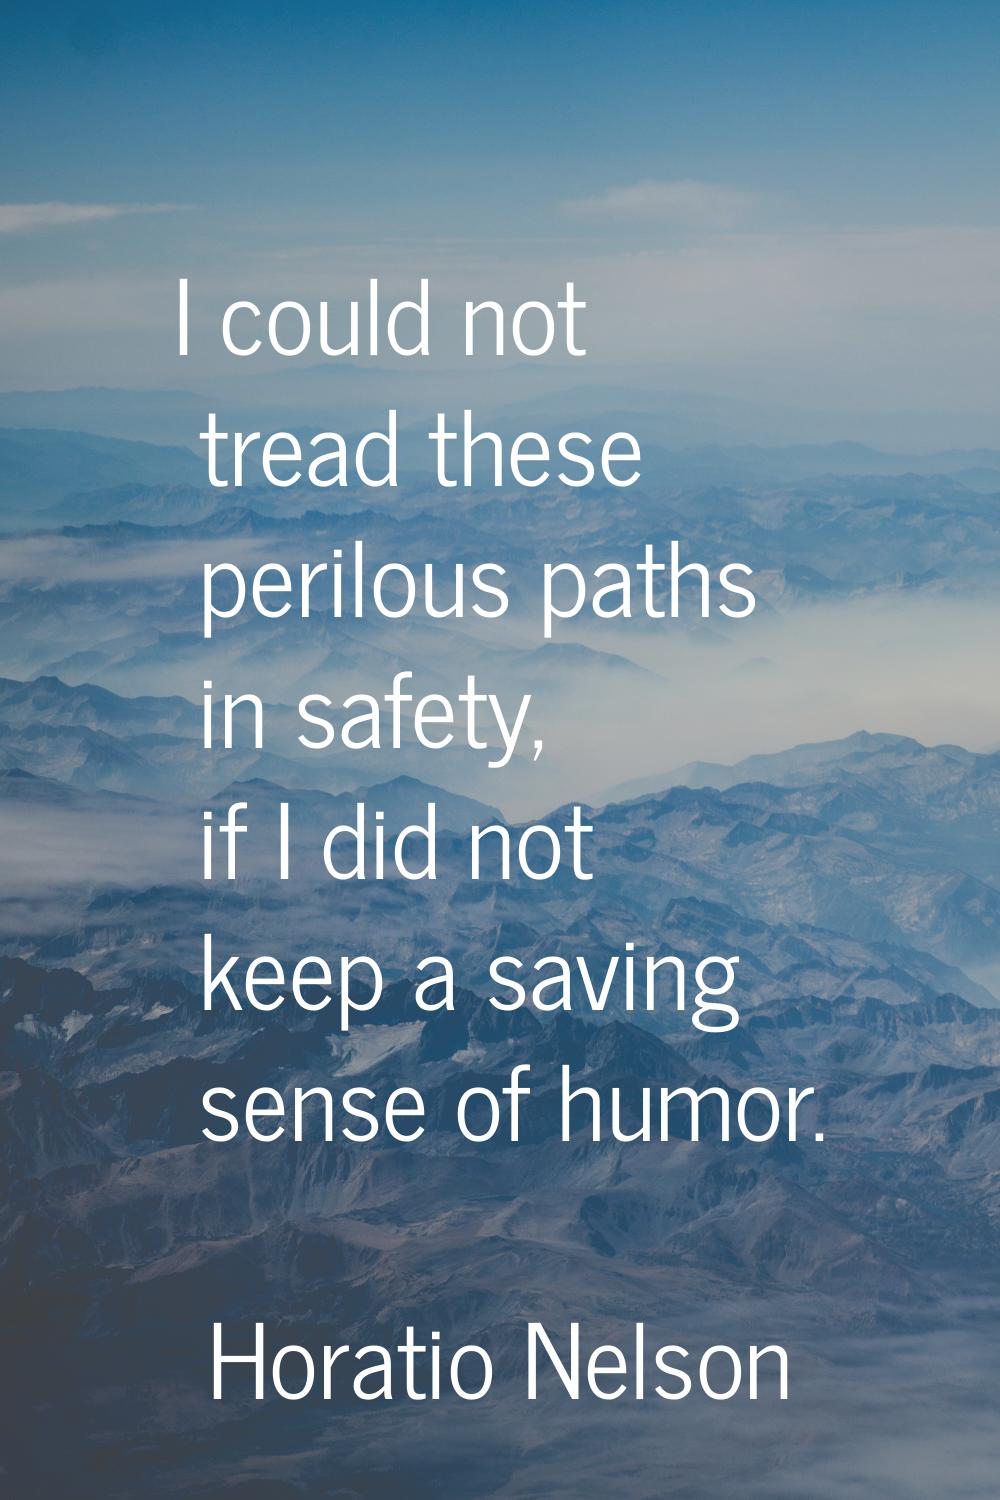 I could not tread these perilous paths in safety, if I did not keep a saving sense of humor.